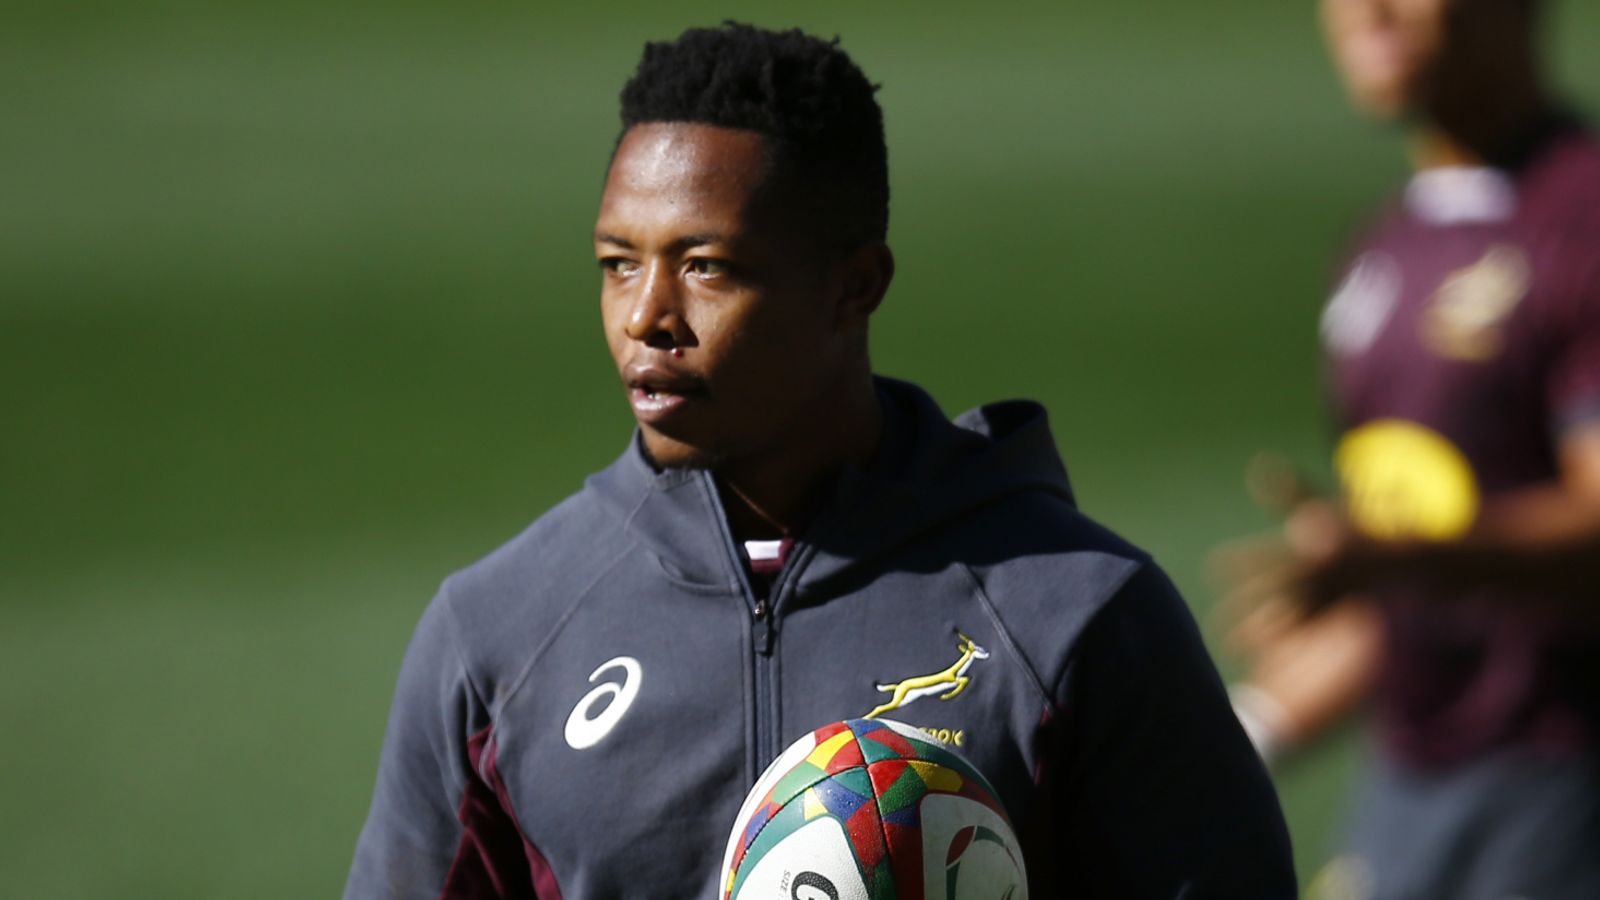 Sbu Nkosi: South Africa winger found ‘safe and sound’, opens up on rugby ‘pressure’